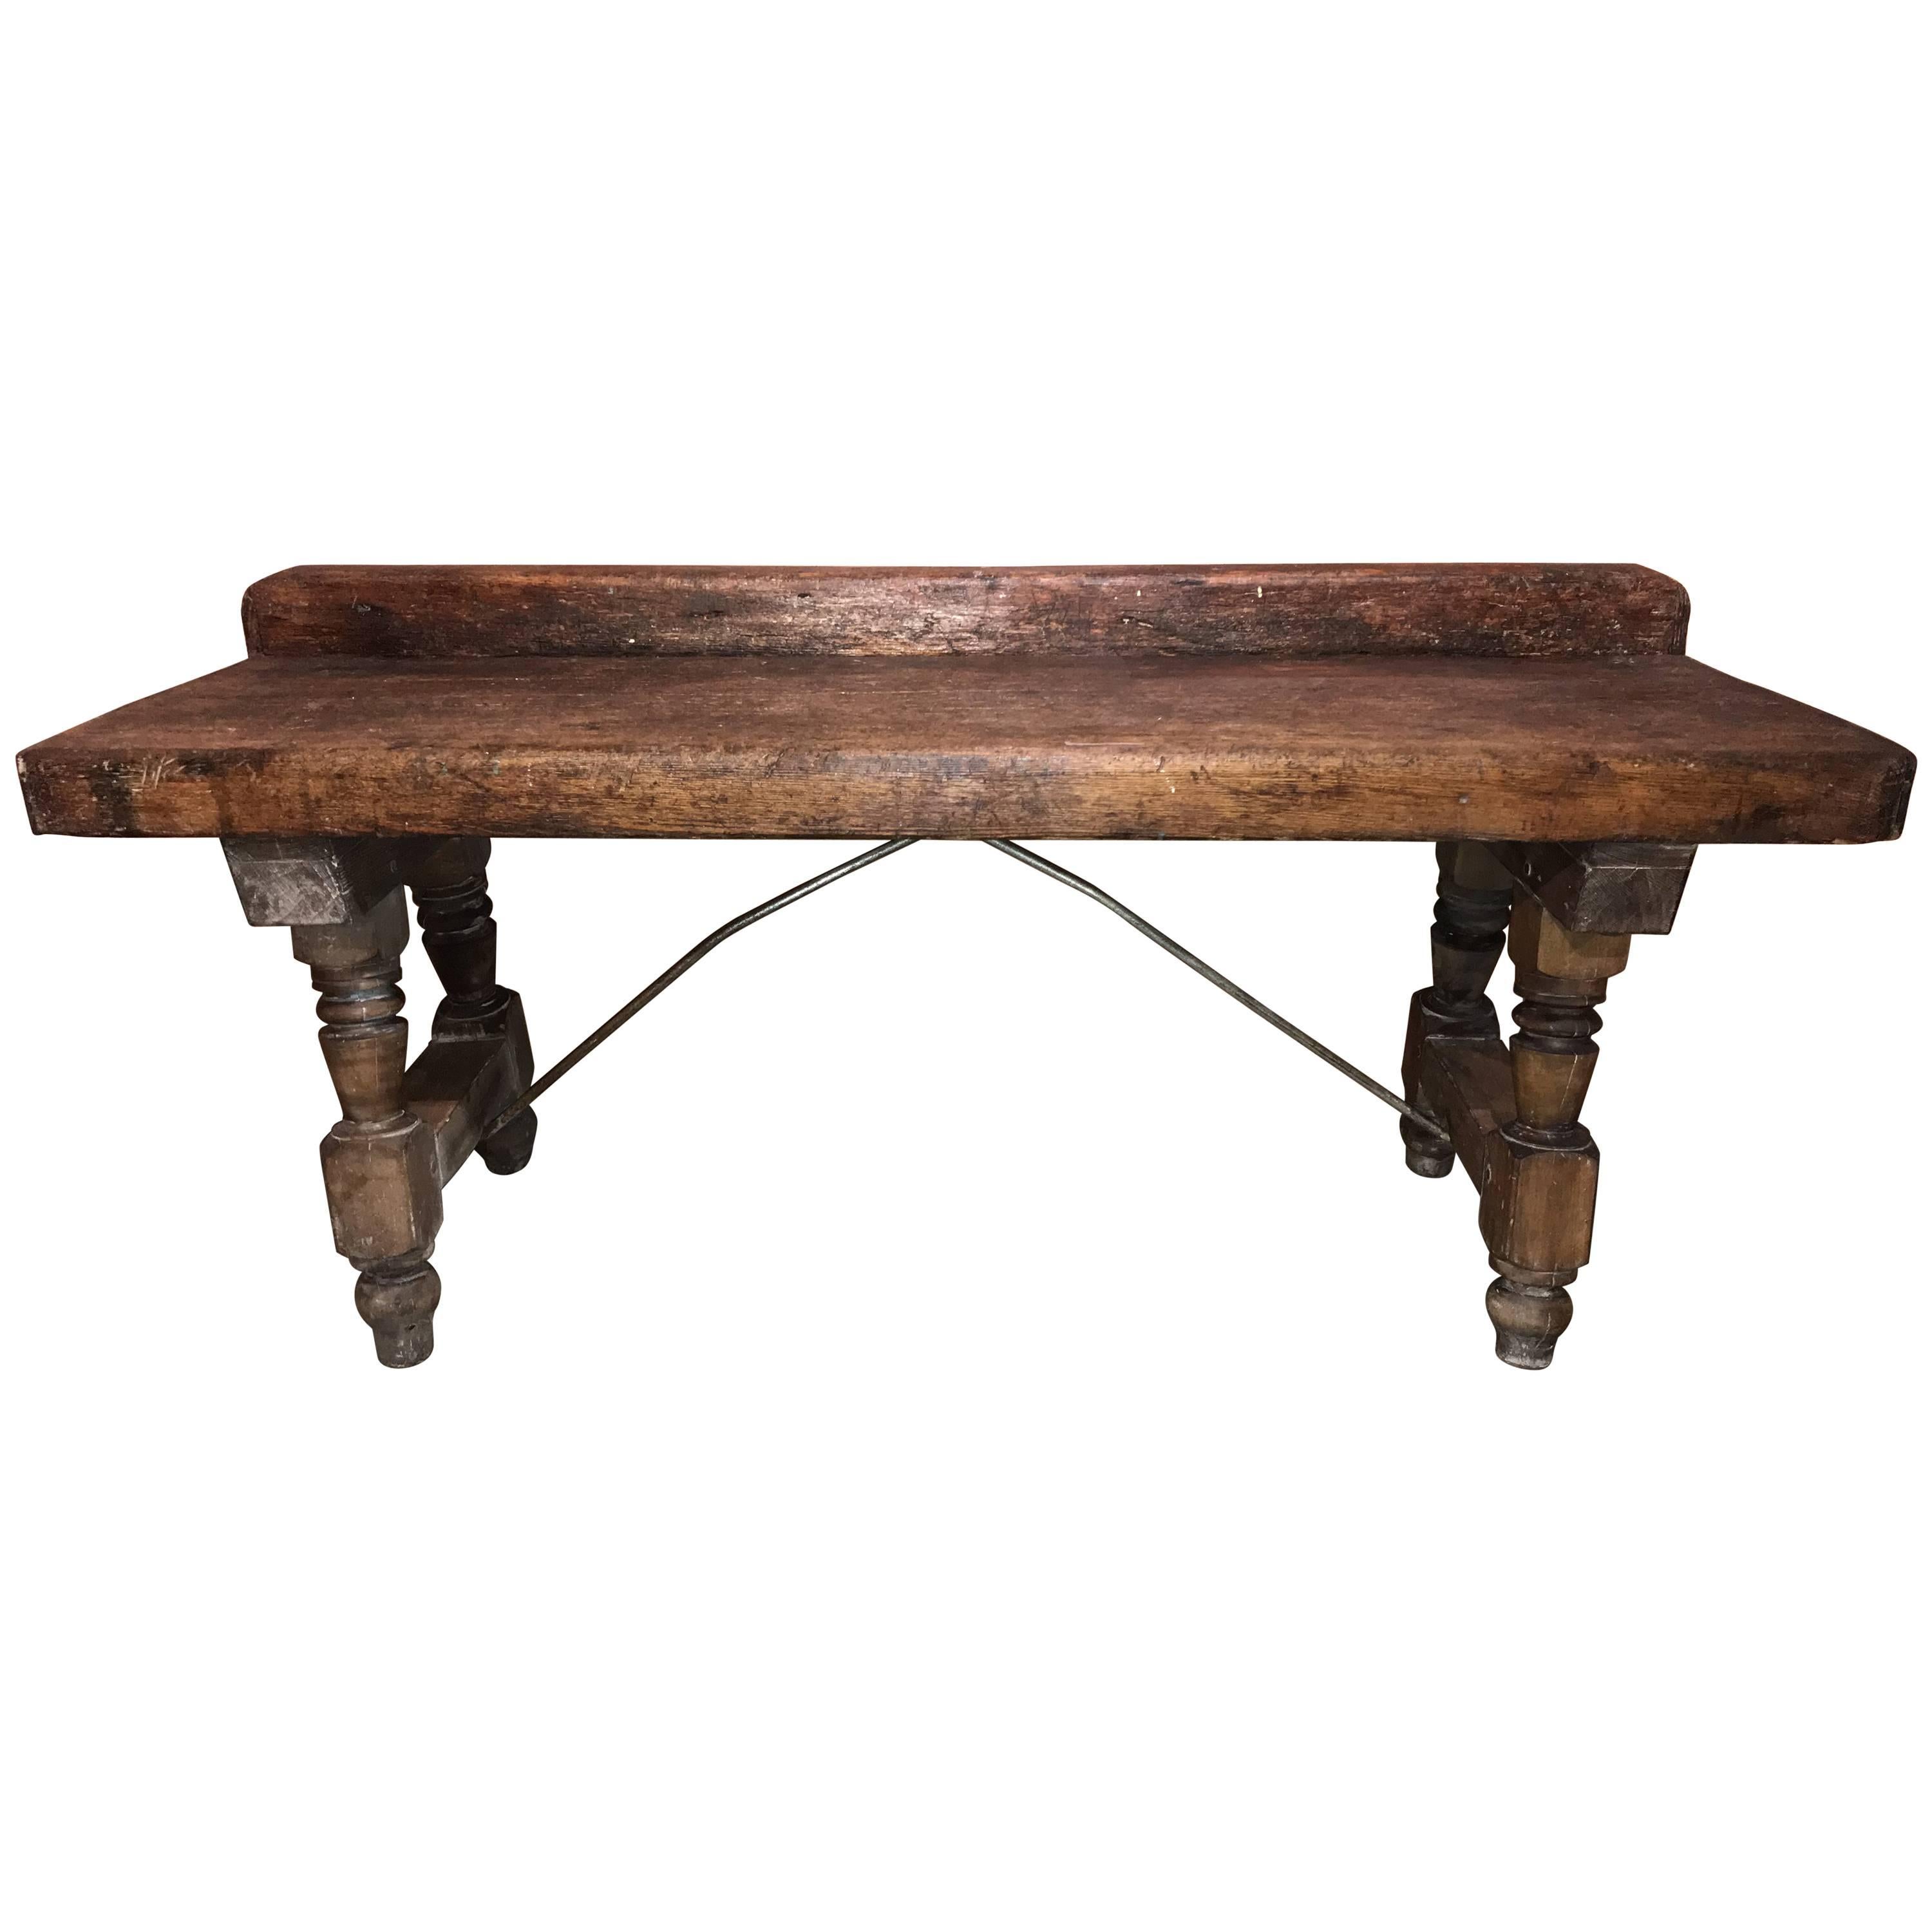 19th Century Continental Counter, Workbench, or Server with Crest Rail